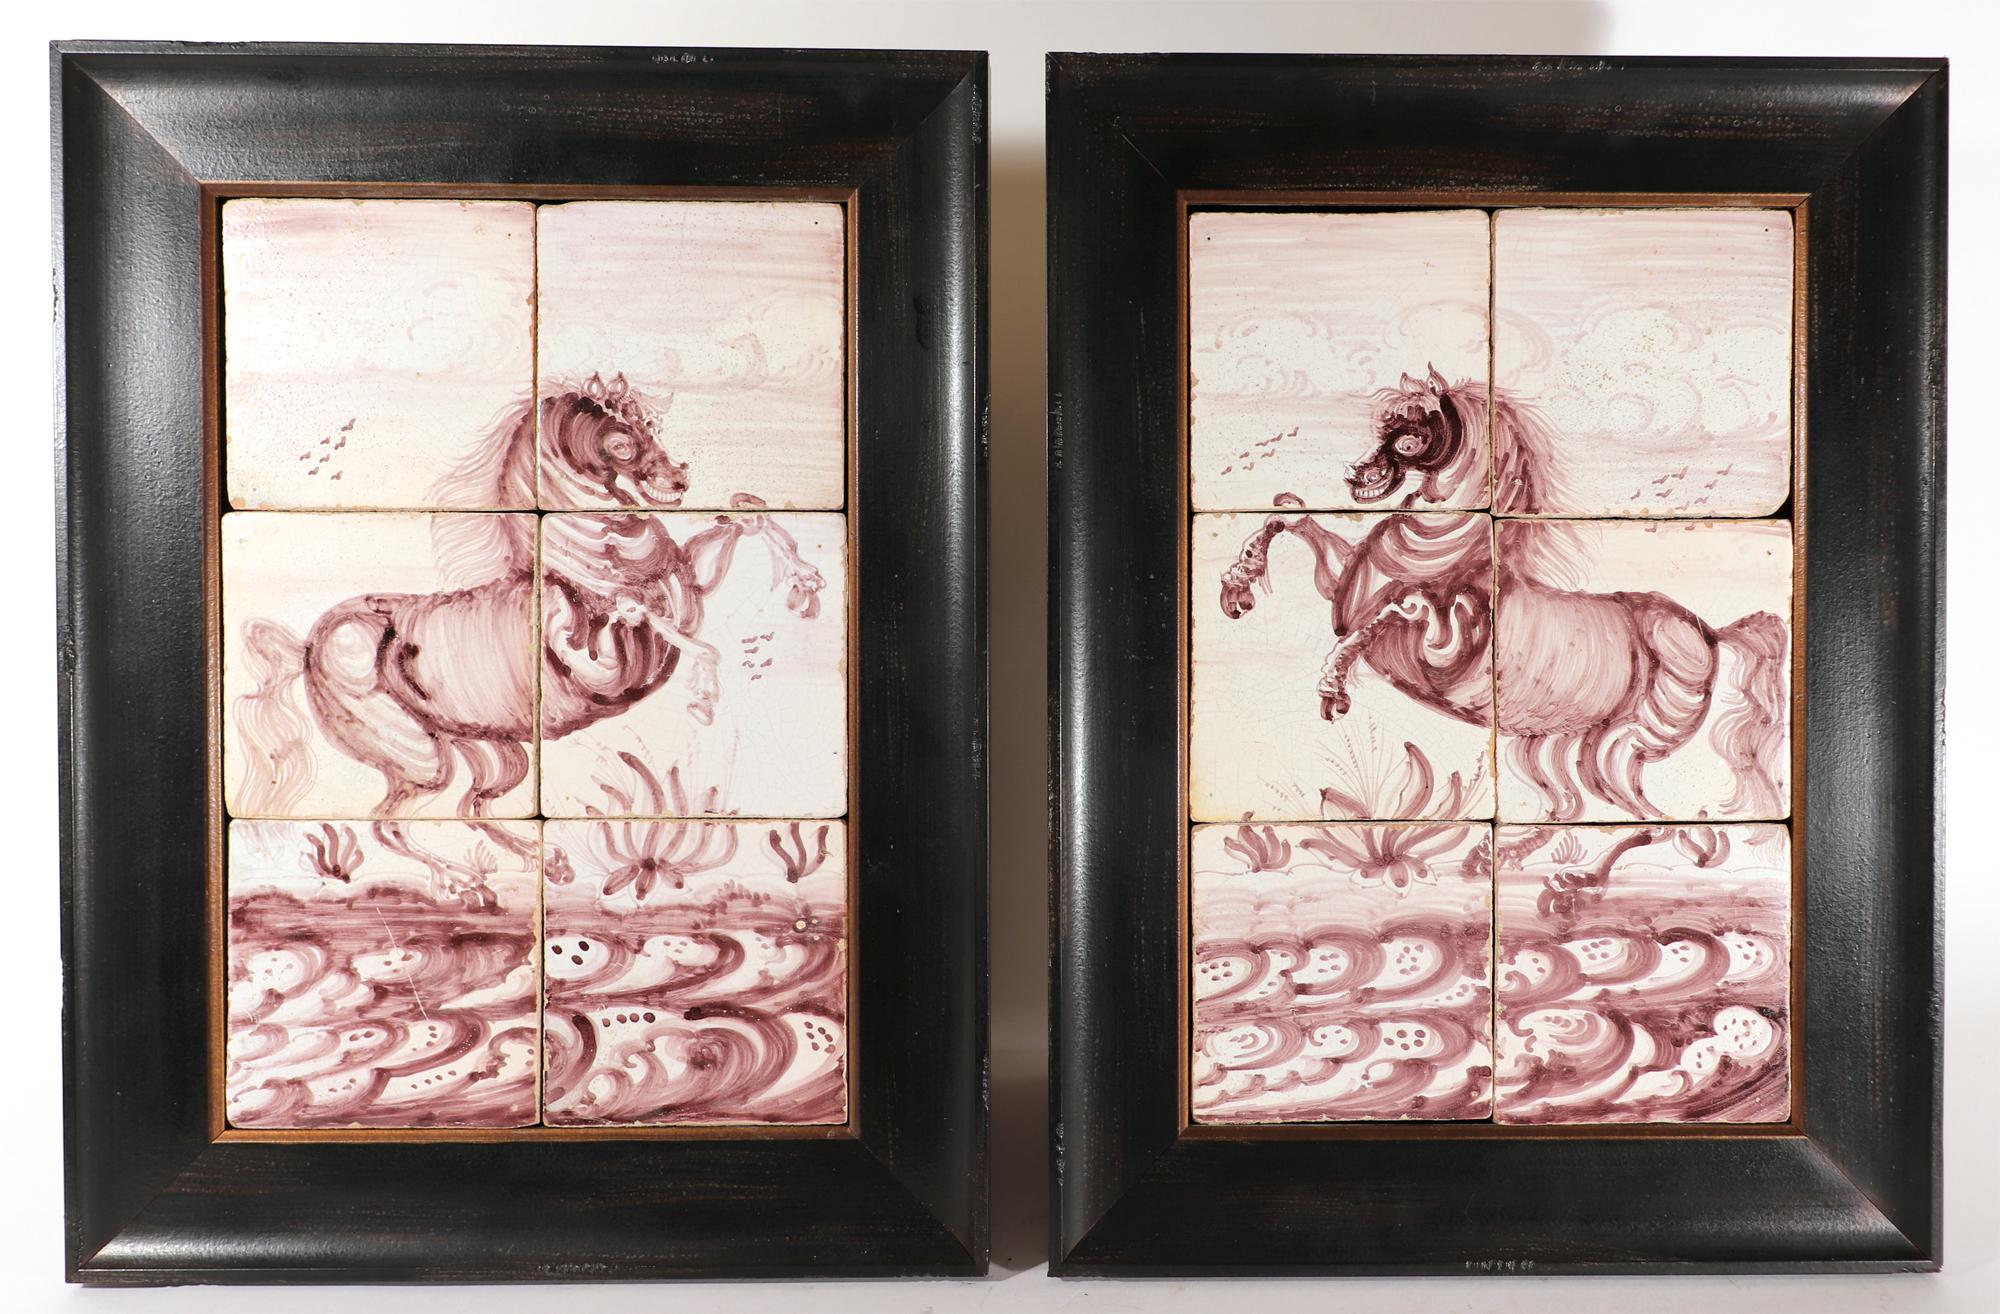 18th Century Dutch Delft Manganese Tiles Pictures of Rearing Horses,
Rotterdam,
Circa 1780

The pair of framed manganese six-tile pictures each depict a horse rearing up as they face each other. They stand in a rough muddy field.

Dimensions: 20 1/4